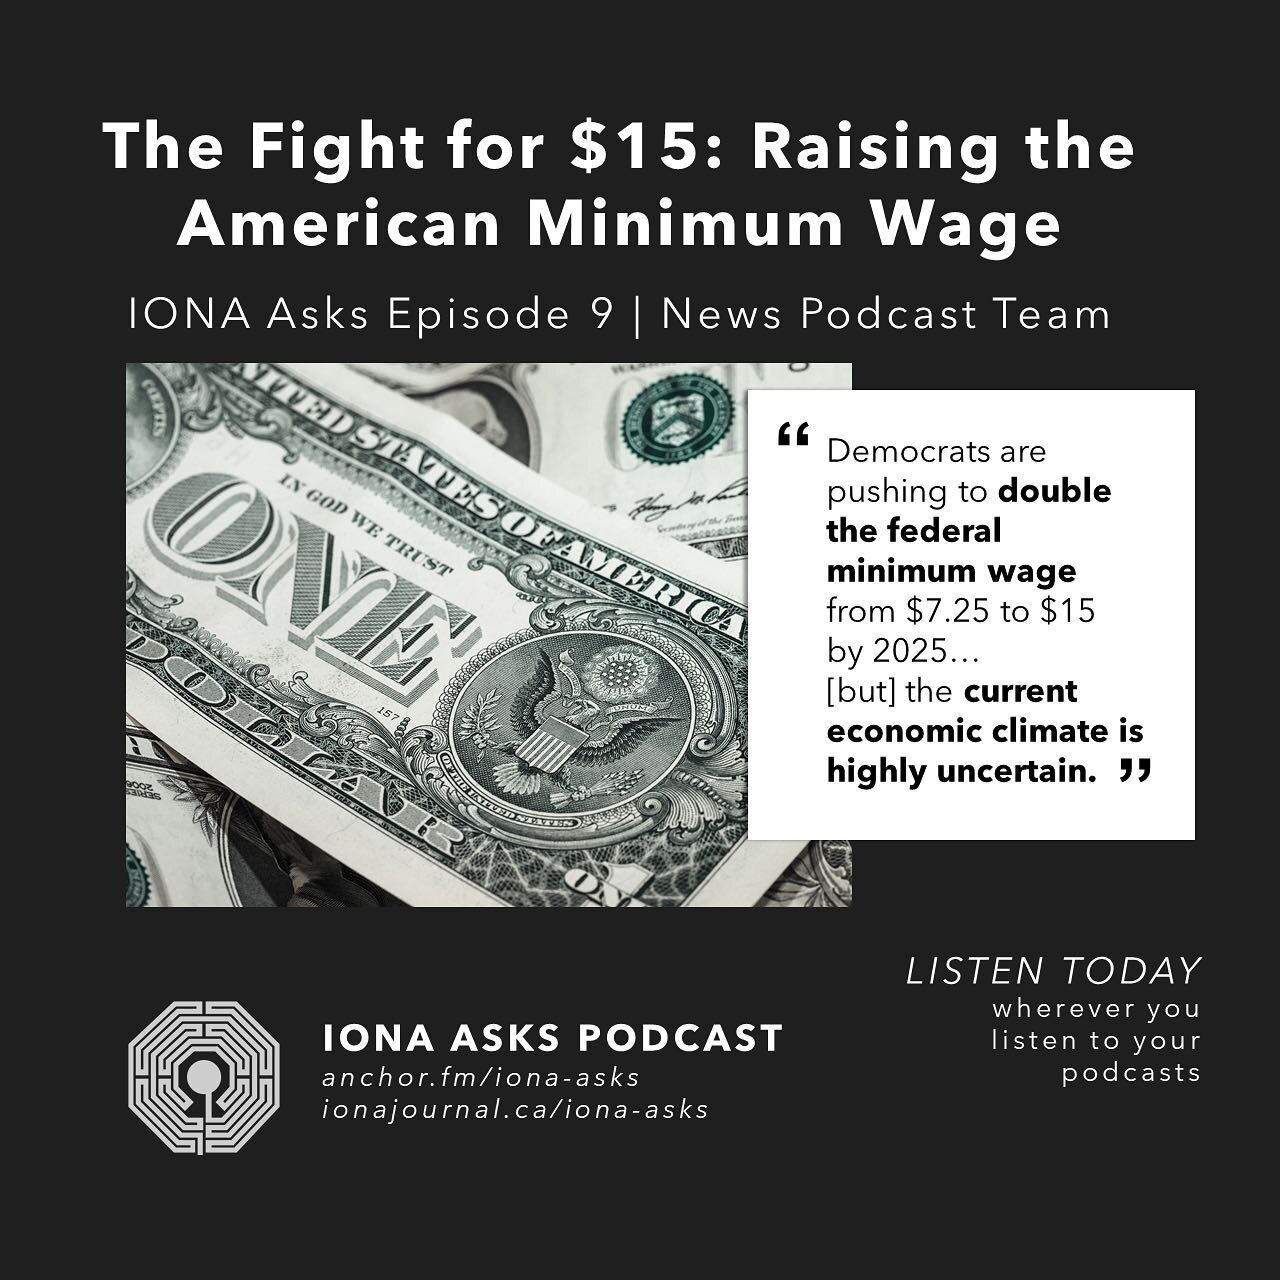 Have you listened to our latest IONA Asks episode? Listen with the link in our bio or at anchor.fm/iona-asks to hear this episode about &ldquo;Money, money, money&rdquo; (like the ABBA song!)

#podcast #episode #new #money #usa #wage #pay #economics 